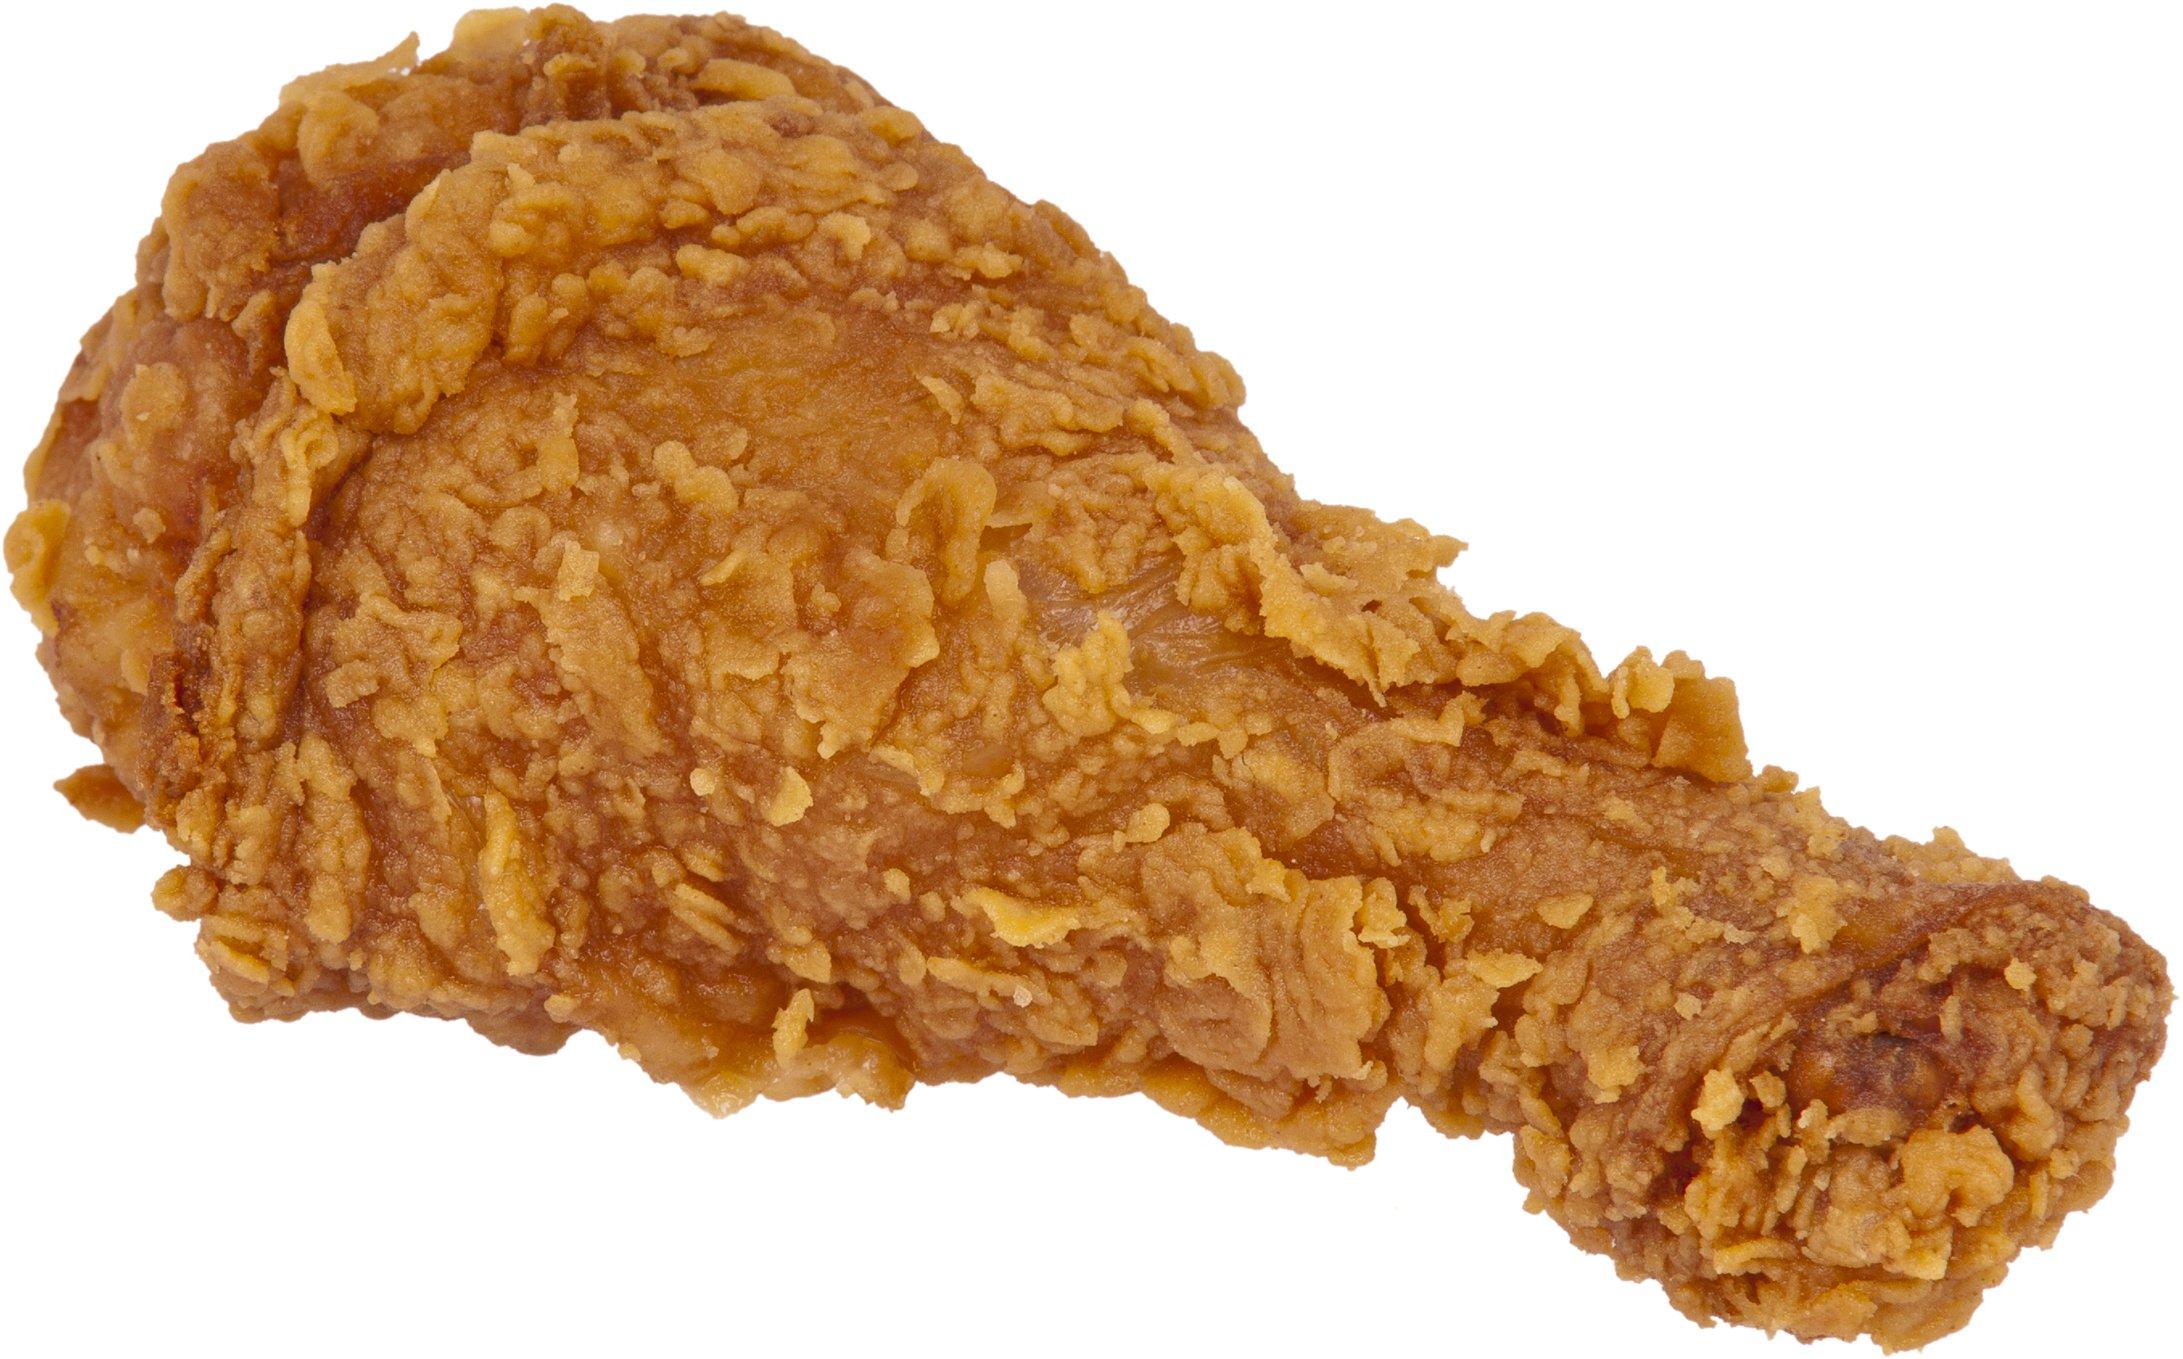 Free download Fried Chicken Wallpaper High Quality Download [2183x1359] for your Desktop, Mobile & Tablet. Explore Fried Chicken Wallpaper. Fried Chicken Wallpaper, Fried Chicken Wallpaper, Chicken Wallpaper